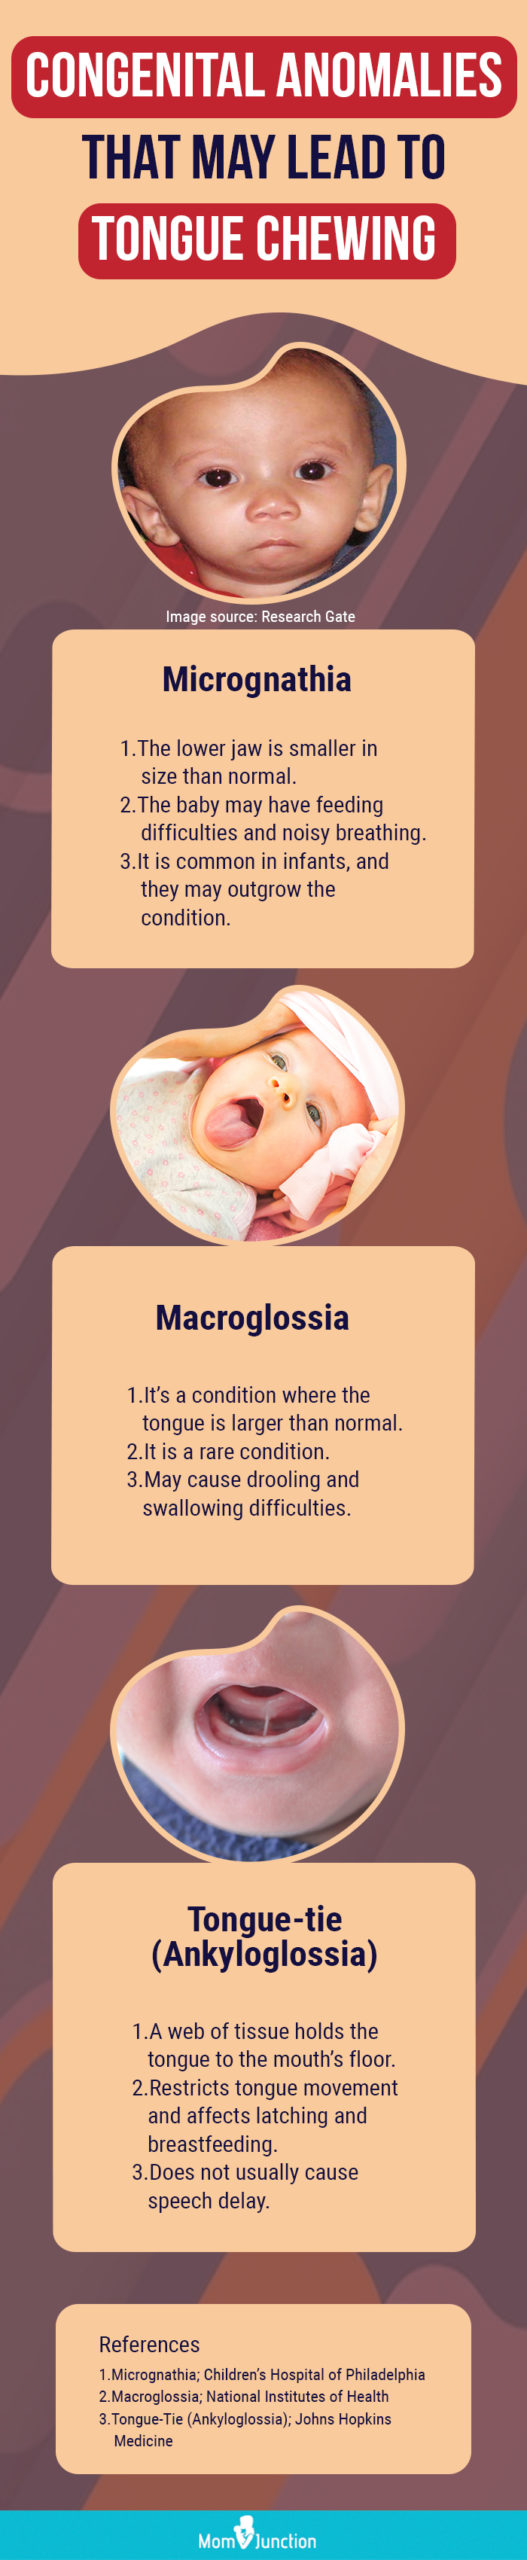 congenital anomalies that may lead to tongue chewing (infographic)